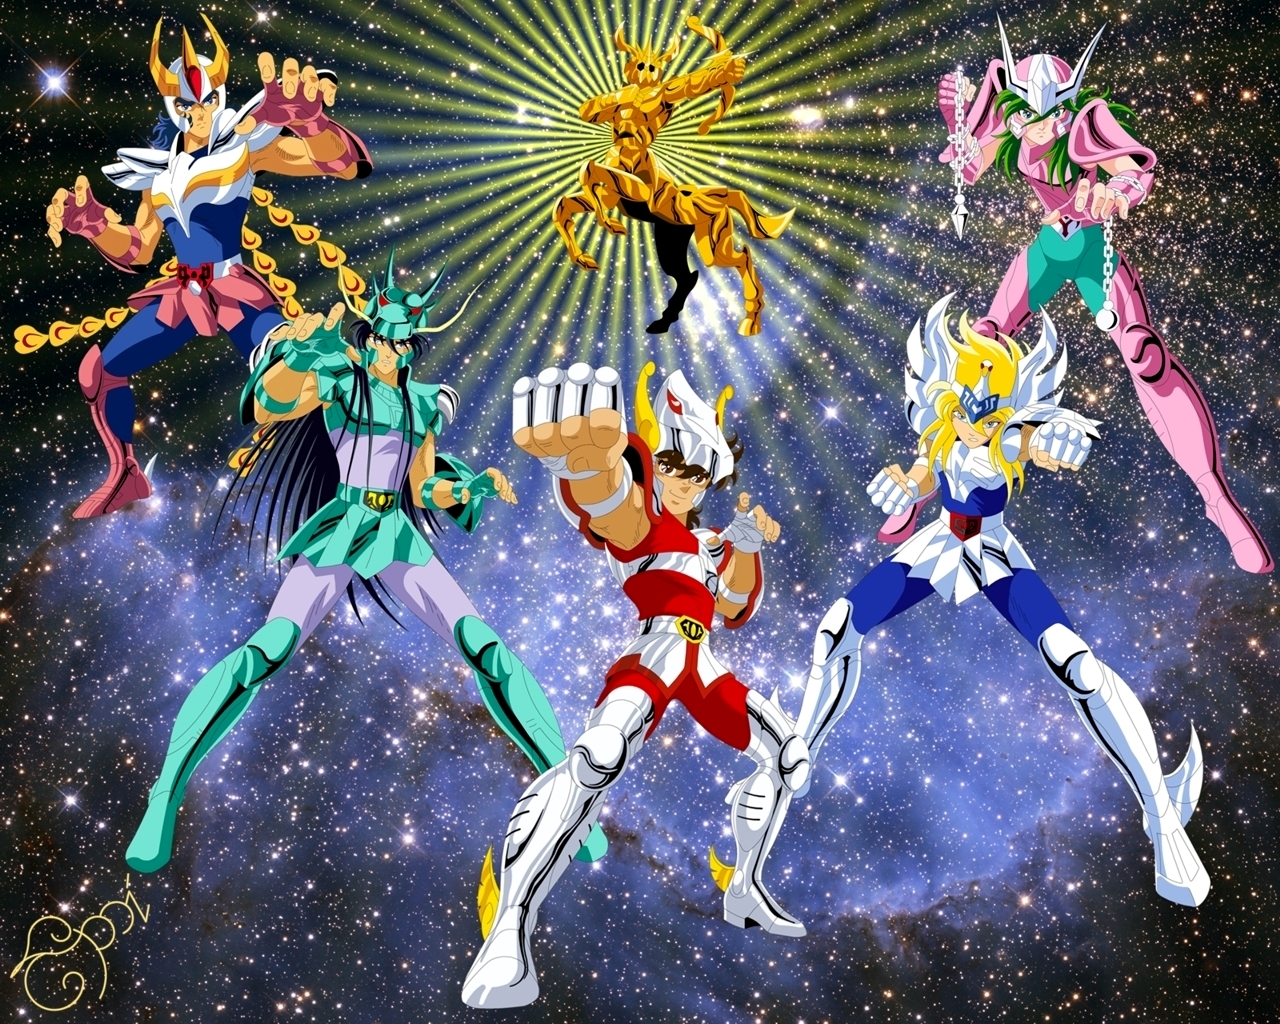 caballeros del zodiaco wallpapers,action figure,fictional character,graphic design,hero,anime